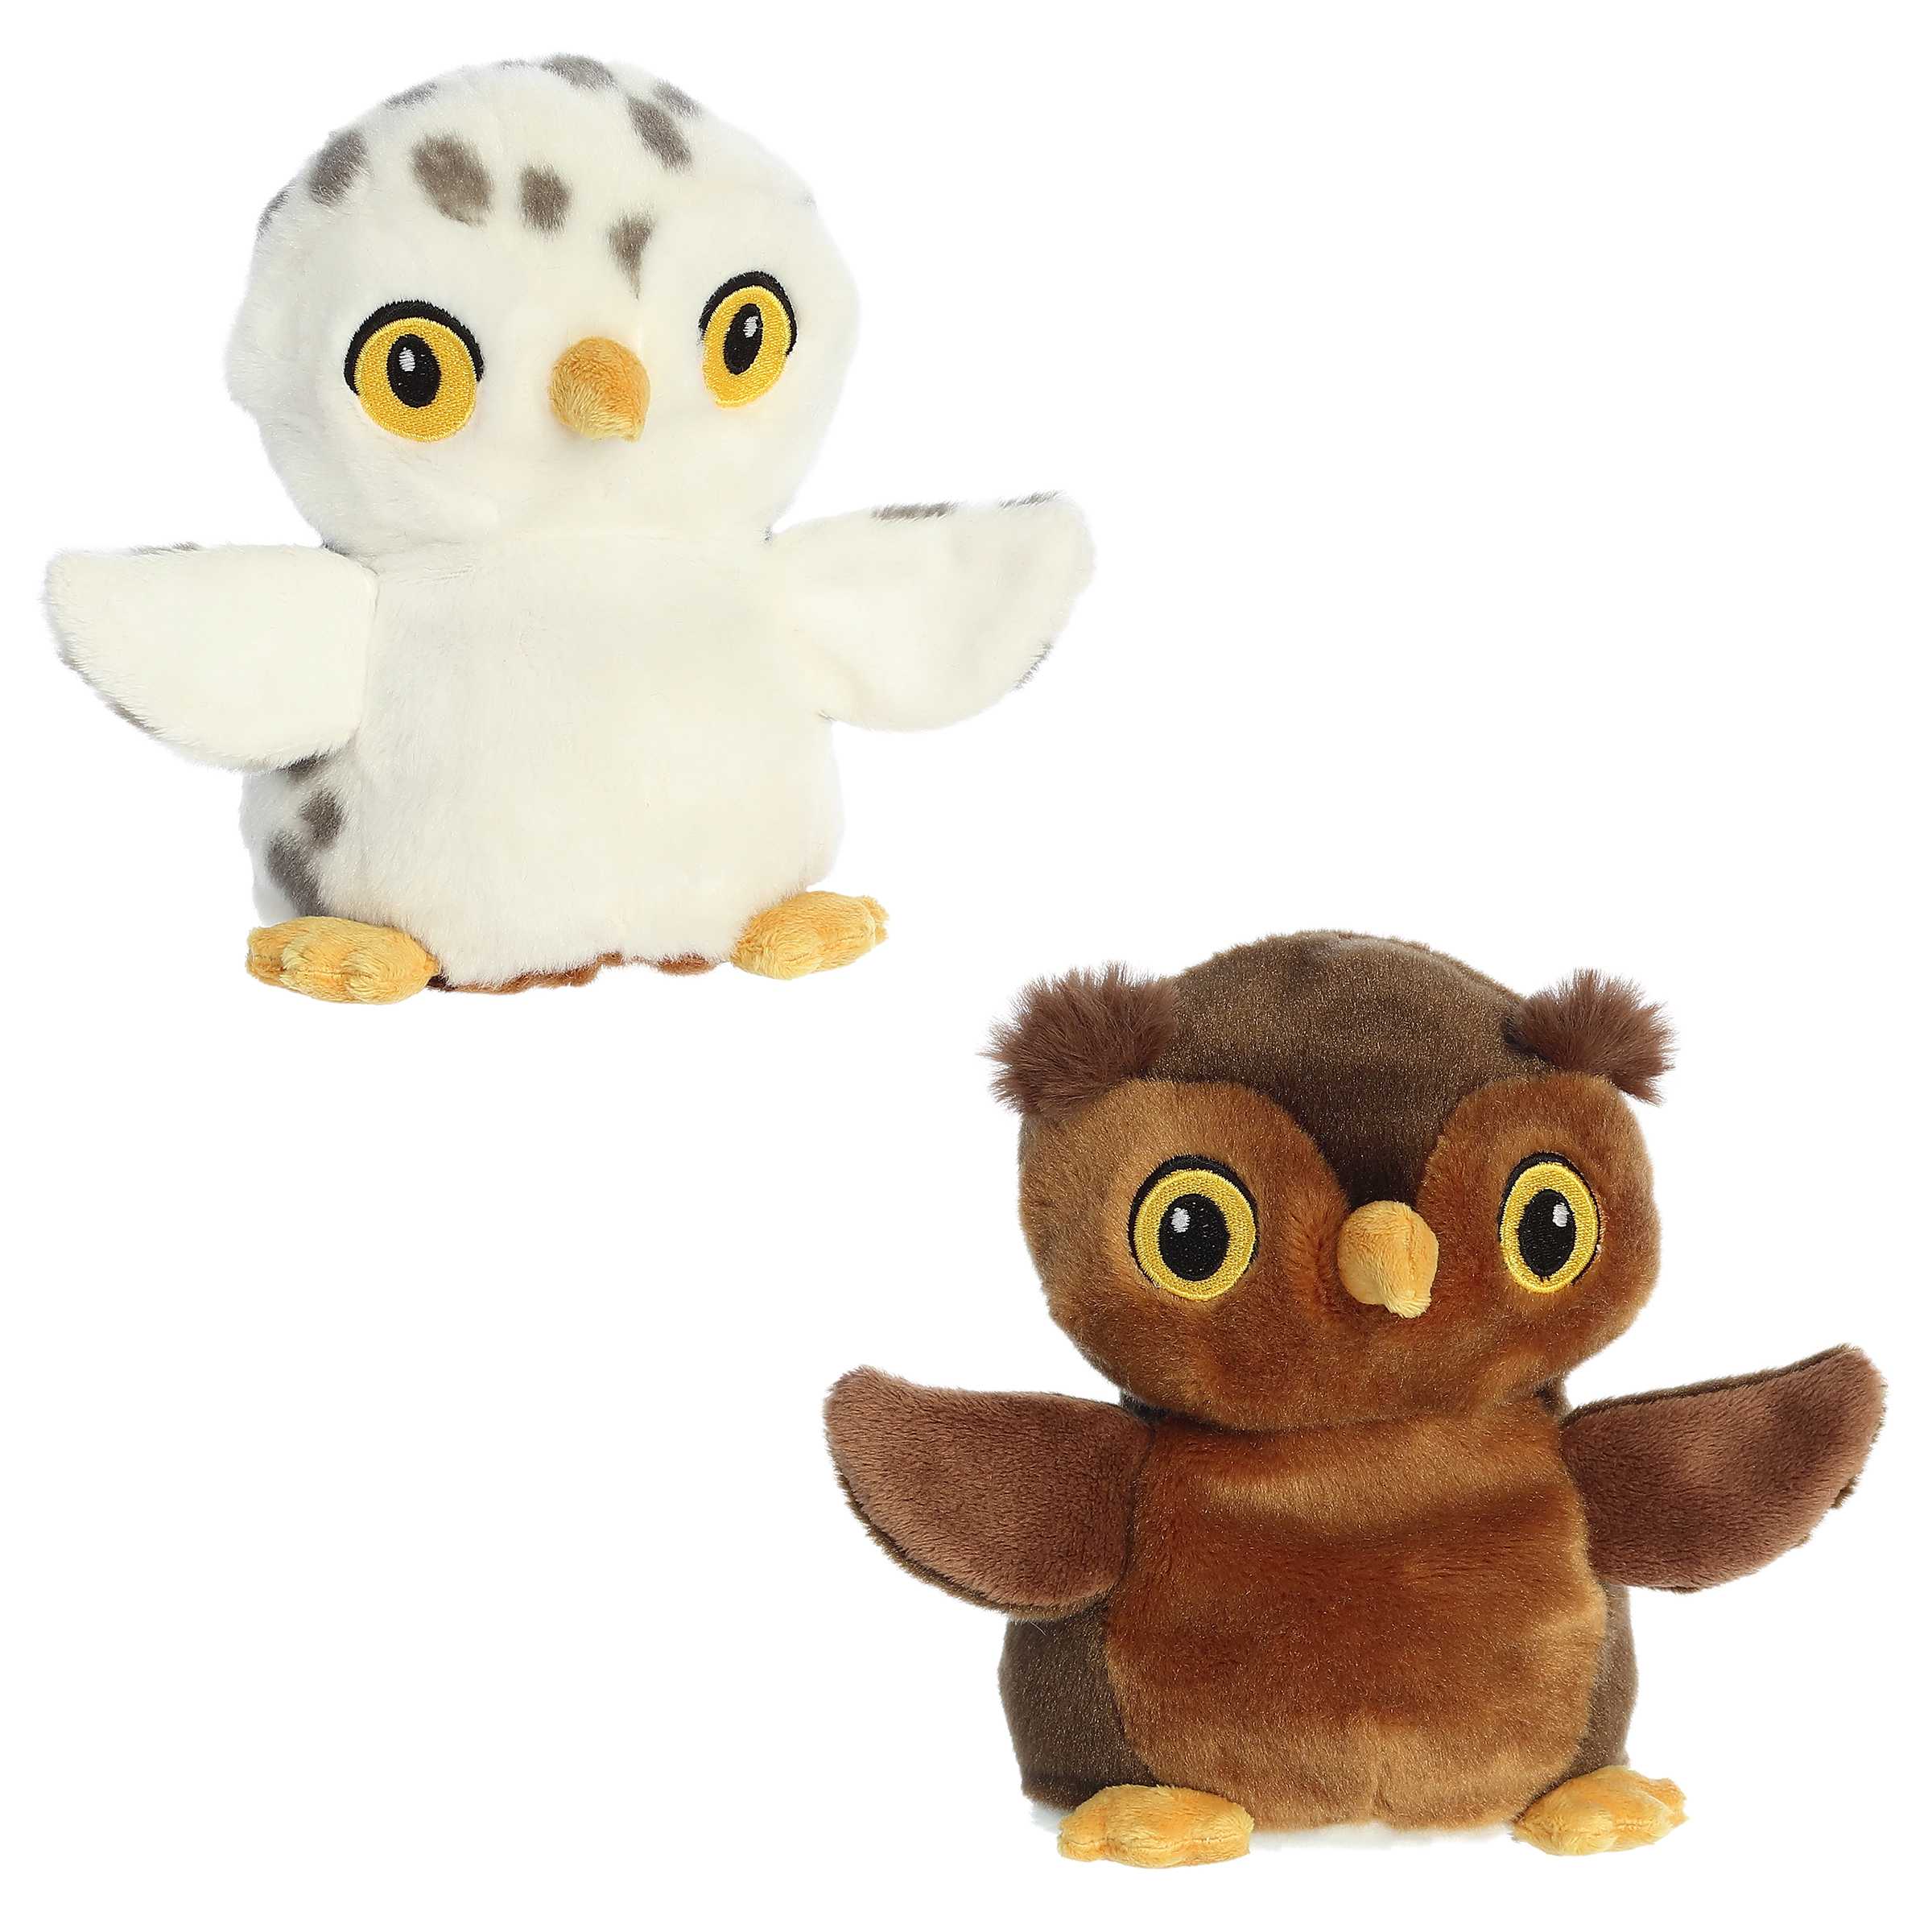 Aurora® - Eco Nation™ - Reversible Eco Pairs - 6.5" Snowy Owl and Barn Owl